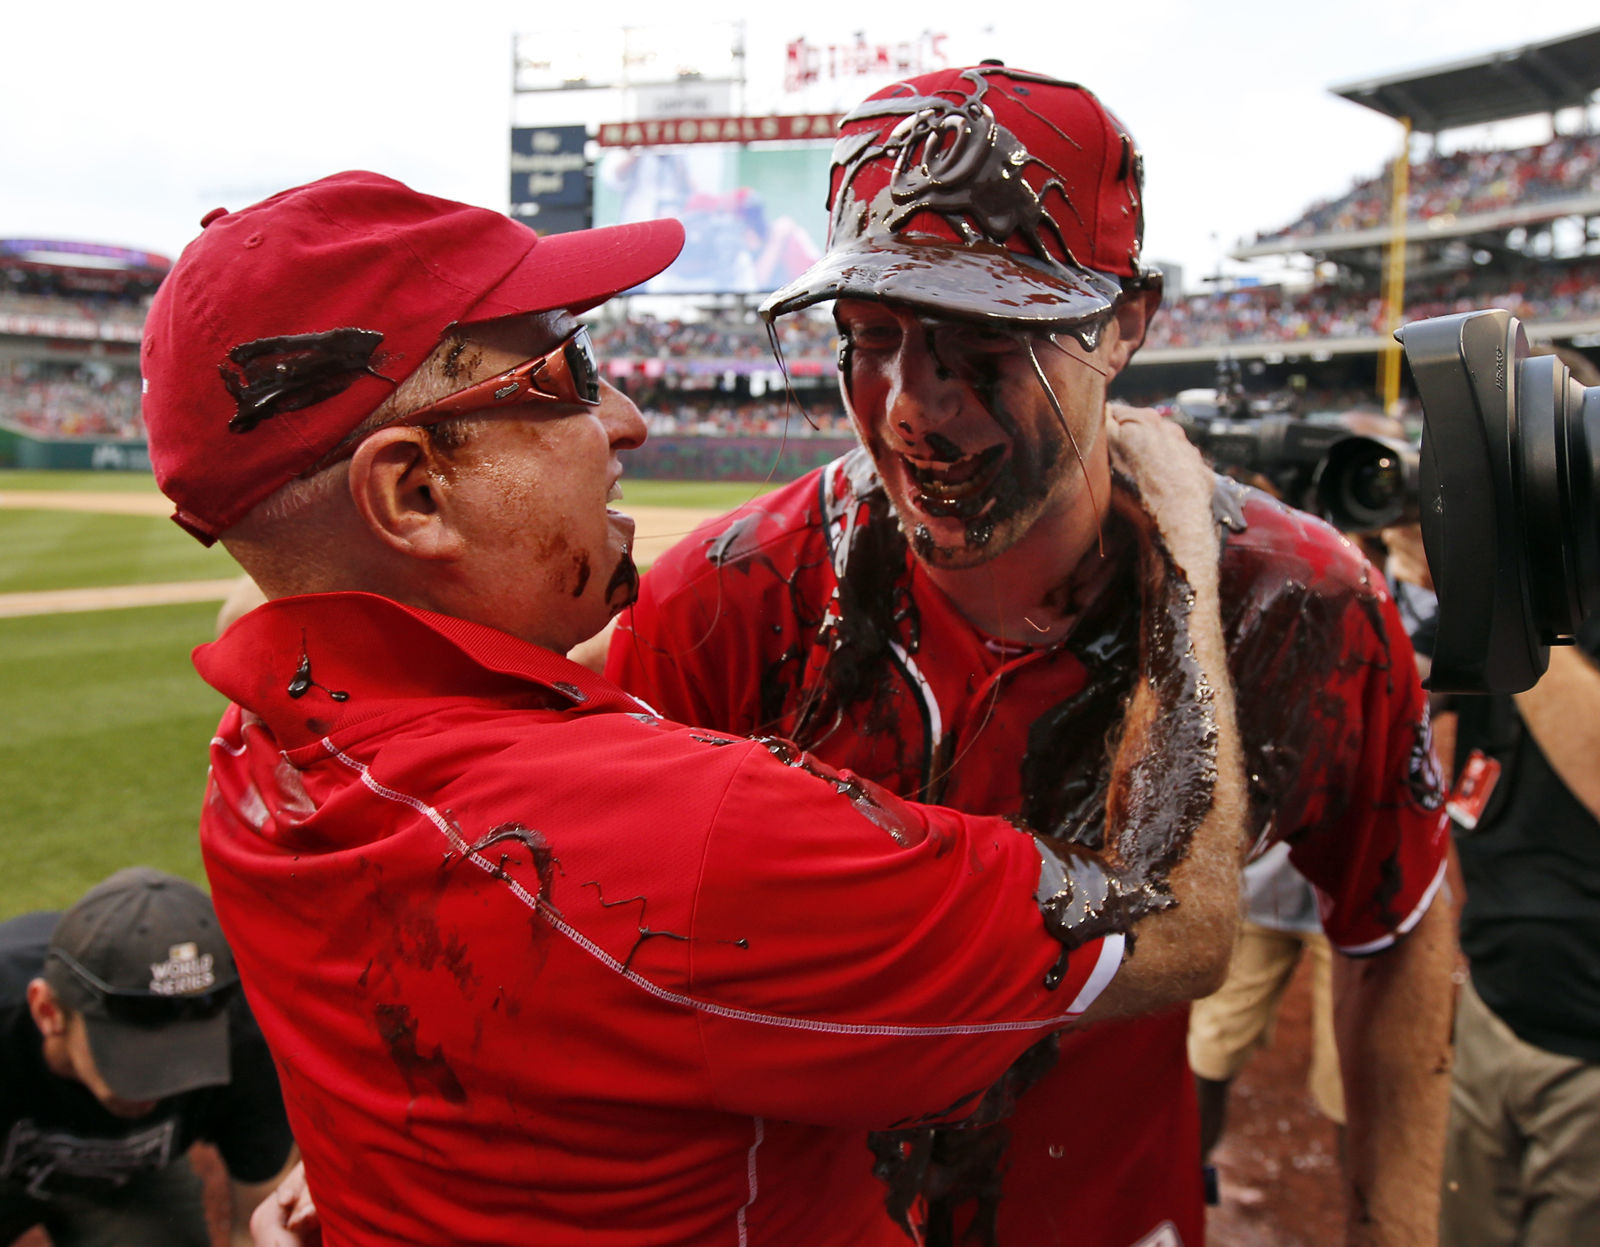 Washington Nationals owner Mark Lerner, left, embraces Washington Nationals starting pitcher Max Scherzer, who is covered with chocolate syrup, after Scherzer's no-hitter baseball game against the Pittsburgh Pirates at Nationals Park, Saturday, June 20, 2015, in Washington. The Nationals won 6-0. (AP Photo/Alex Brandon)